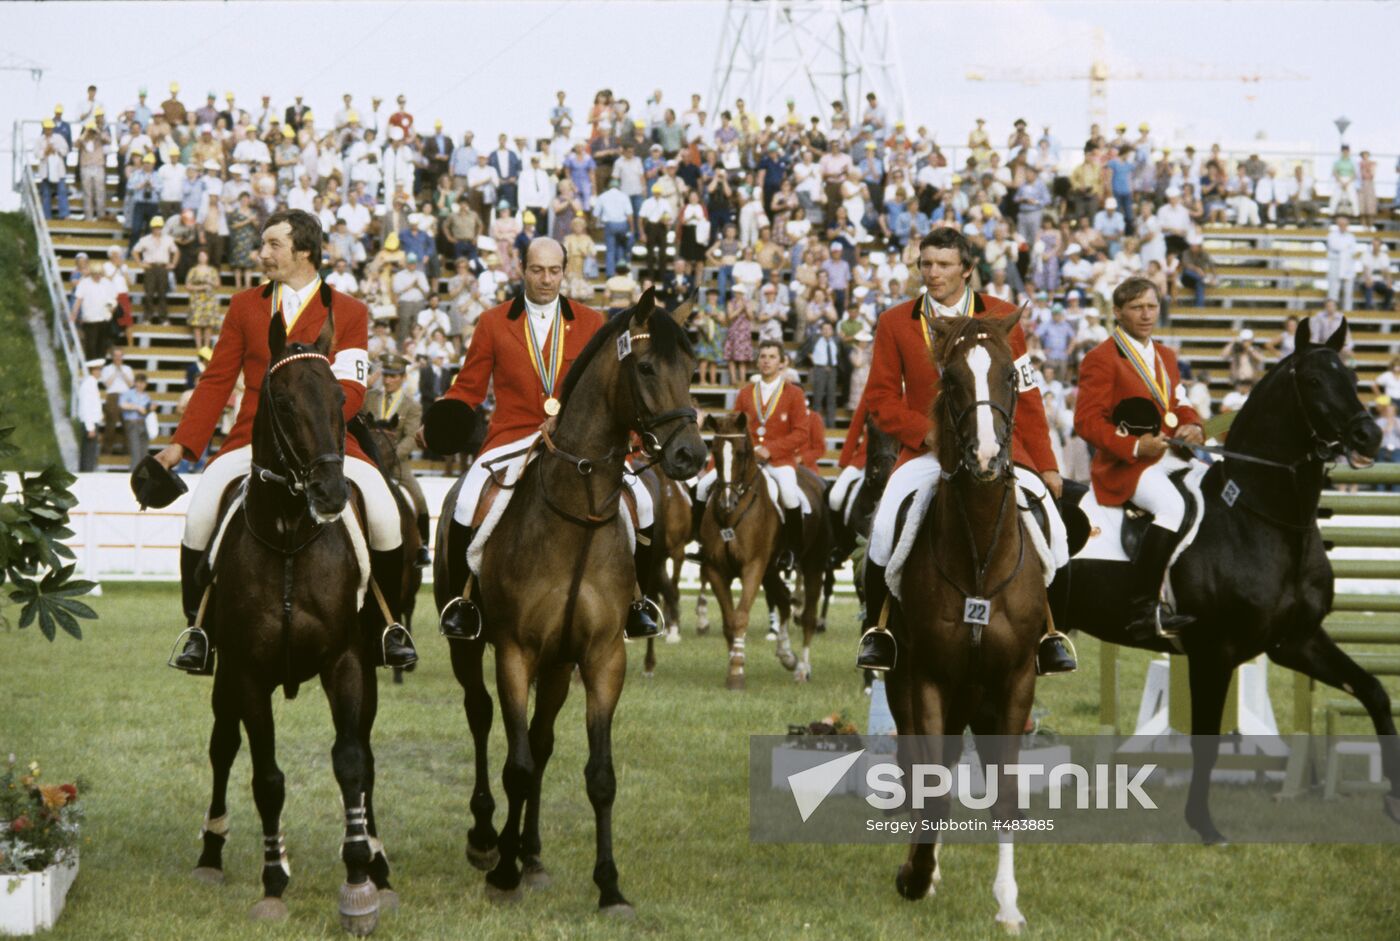 USSR national horse riding team